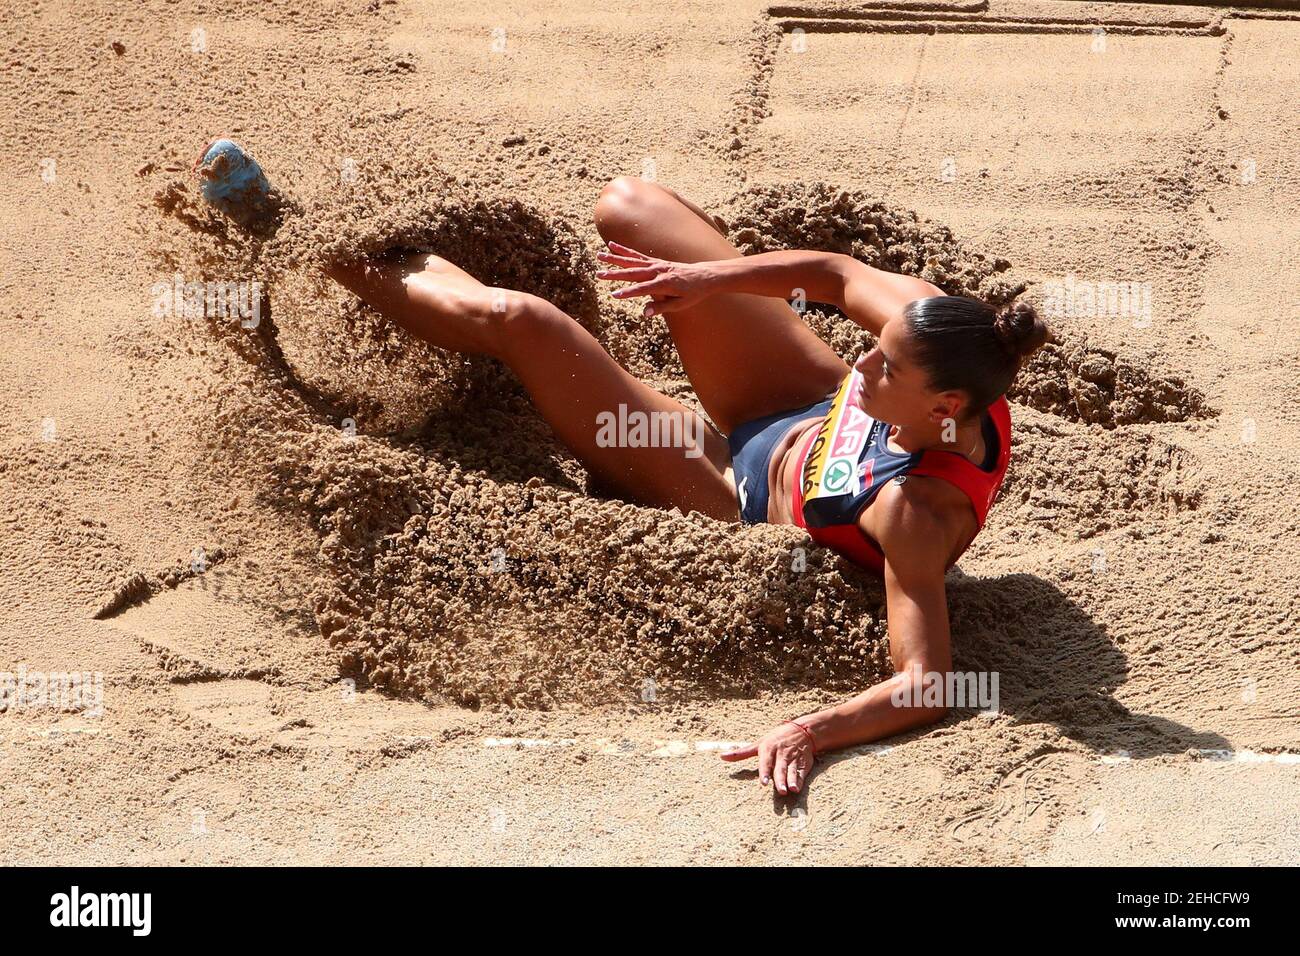 2018 European Championships - Women's Long Jump Qualifying - Olympic Stadium, Berlin, Germany - August 9, 2018  Ivana Spanovic of Serbia in action  REUTERS/Michael Dalder Stock Photo